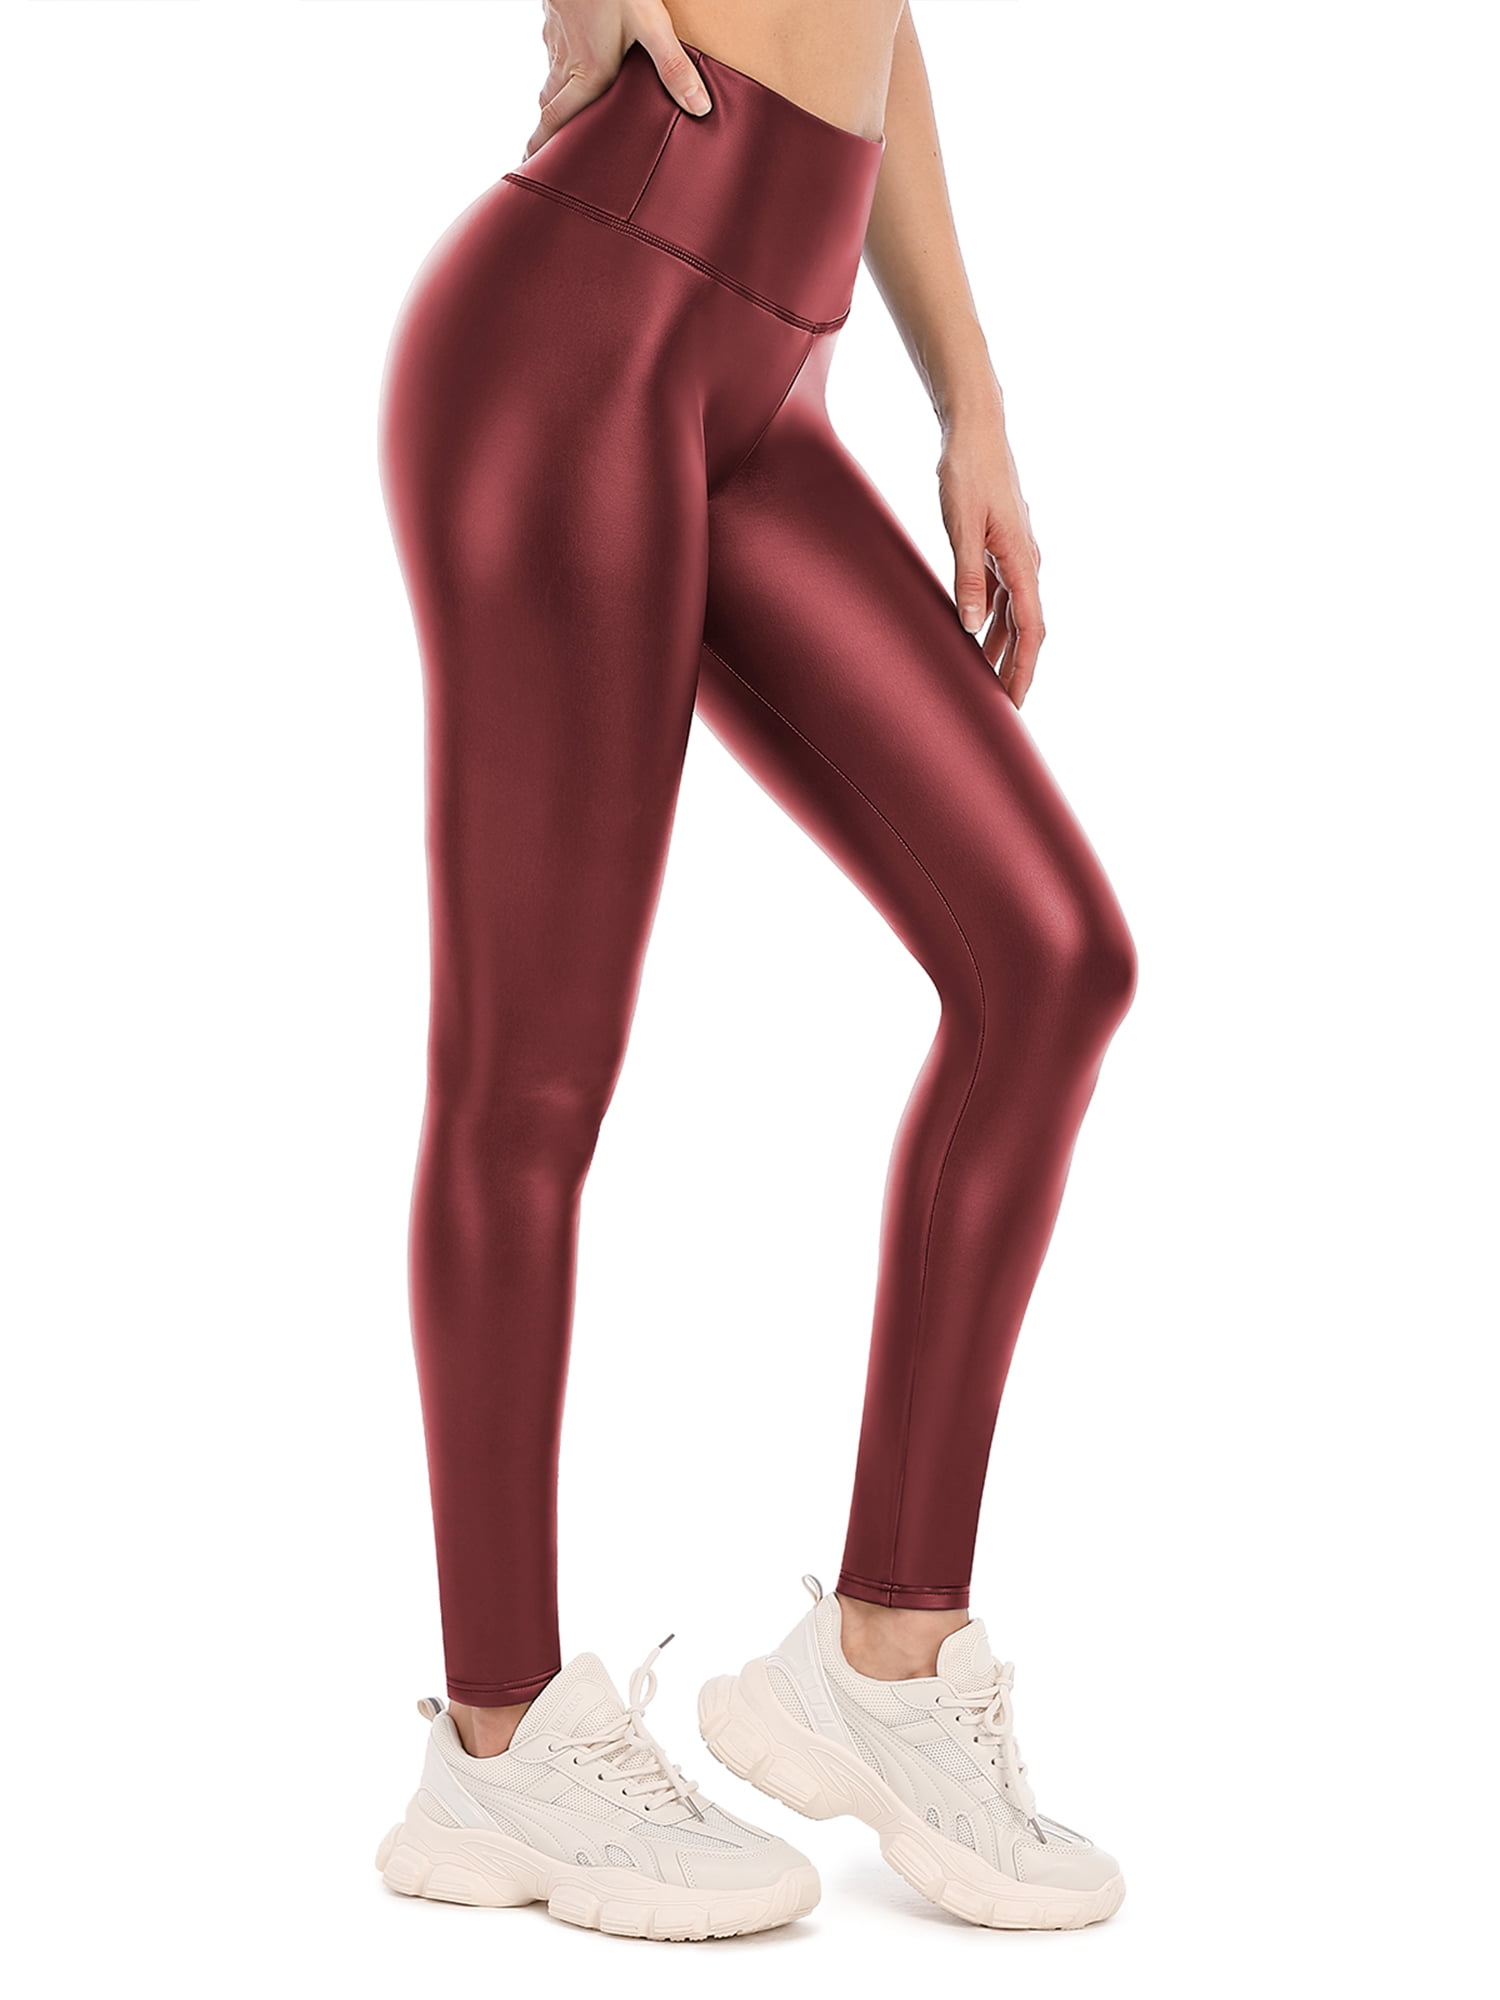 Women's Fleece Lined Leggings Faux Leather Thermal Warm Yoga Pants with ...